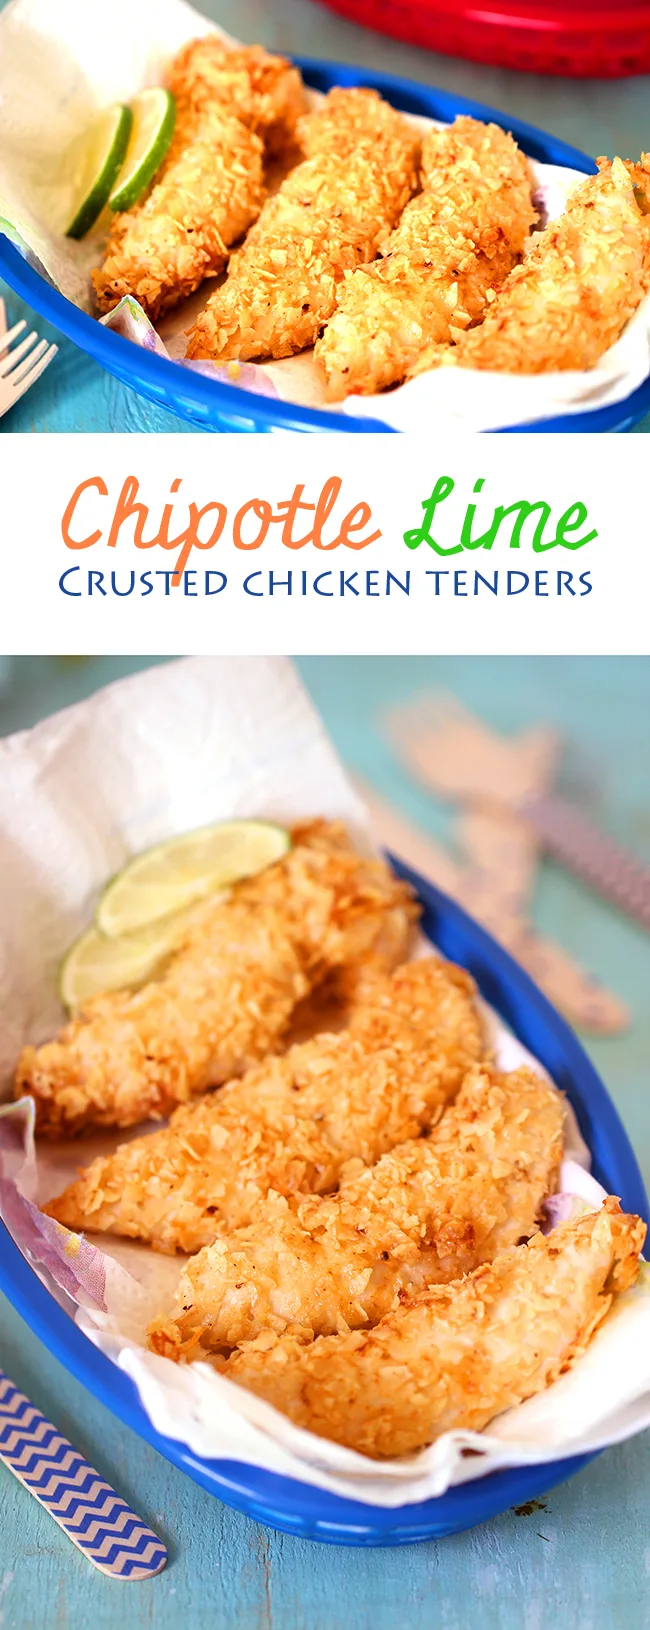 Take it from blah to FIESTA time with these knock your socks off Chipotle Lime Crushed Chicken Tenders. Bake in only 20 mins! Woot! 